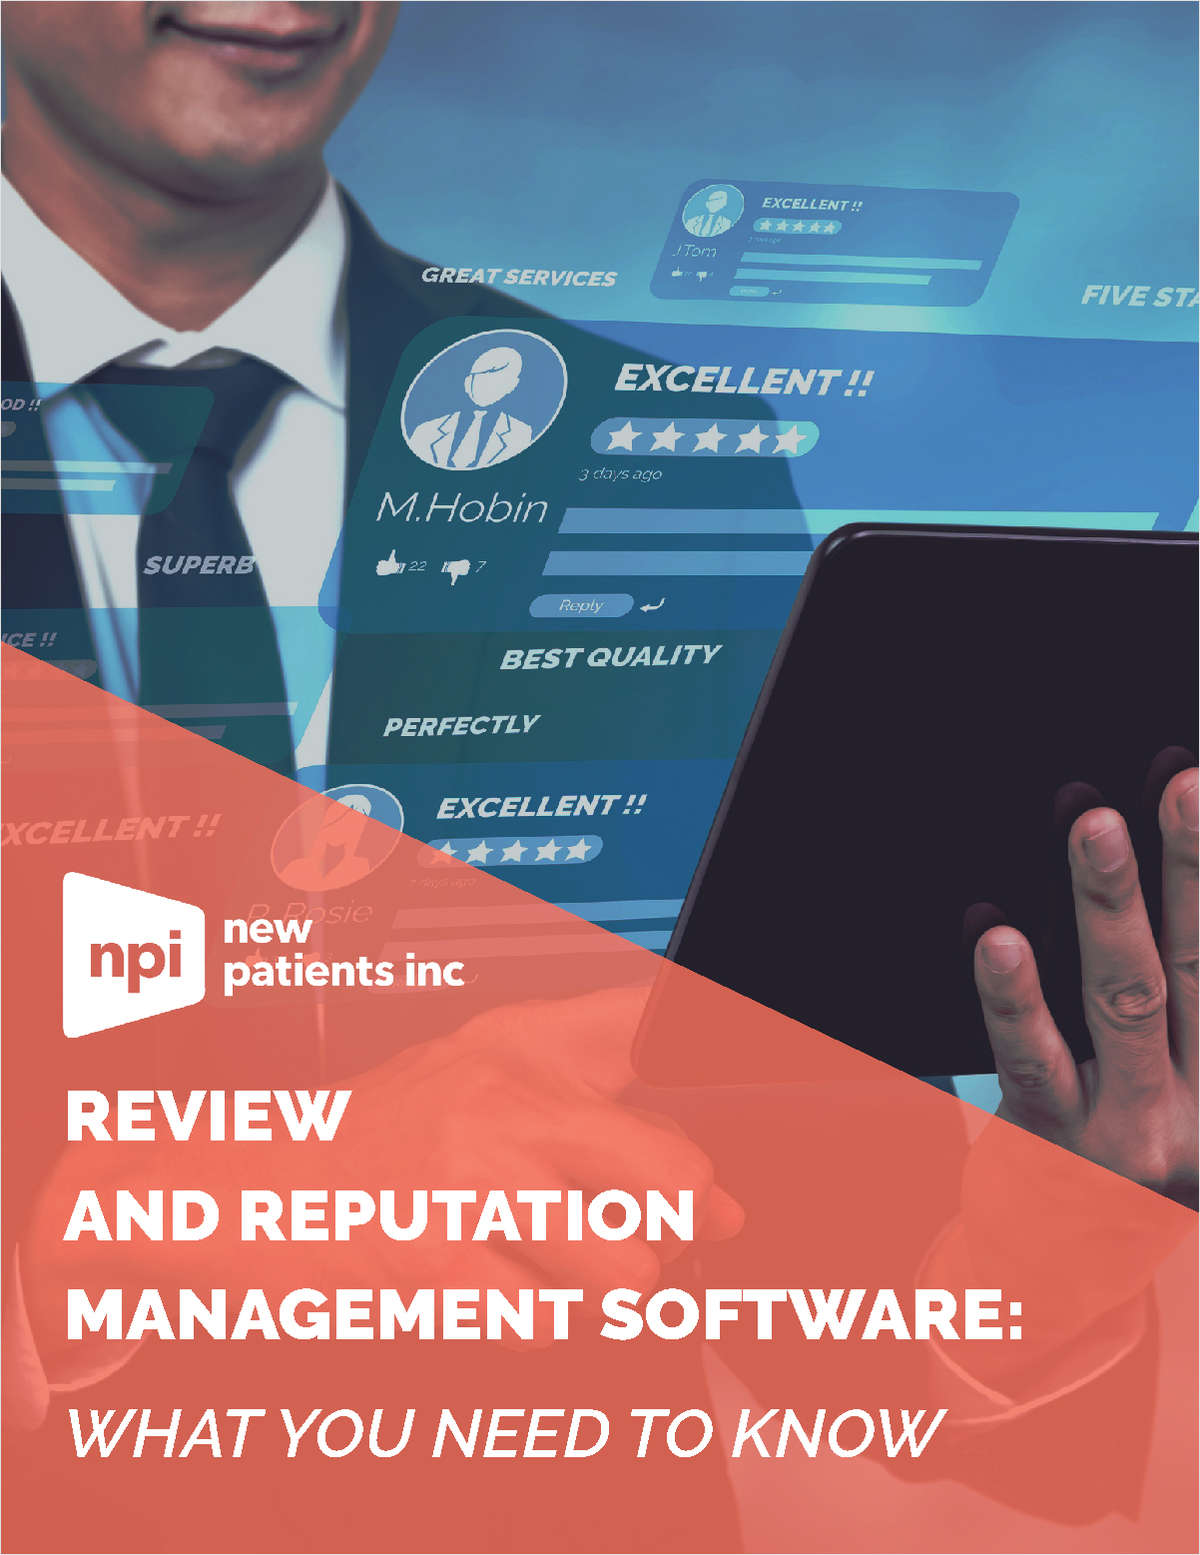 Review and Reputation Management Software - What You Need to Know